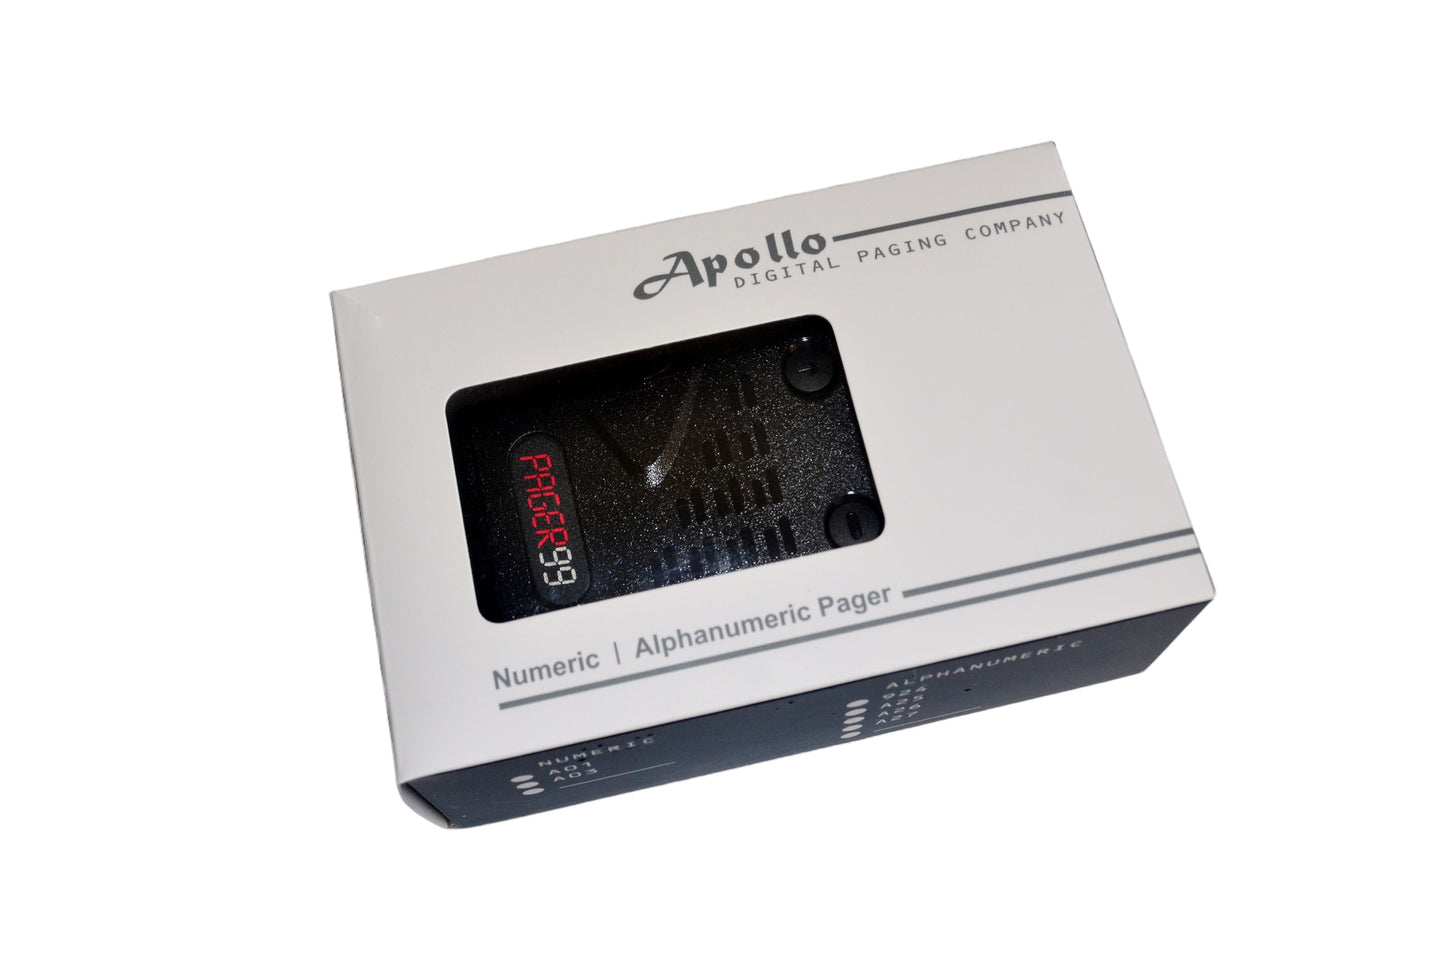 Apollo XL2000 1-Way Numeric Pager (Brand New) with 12-Month Prepaid Service